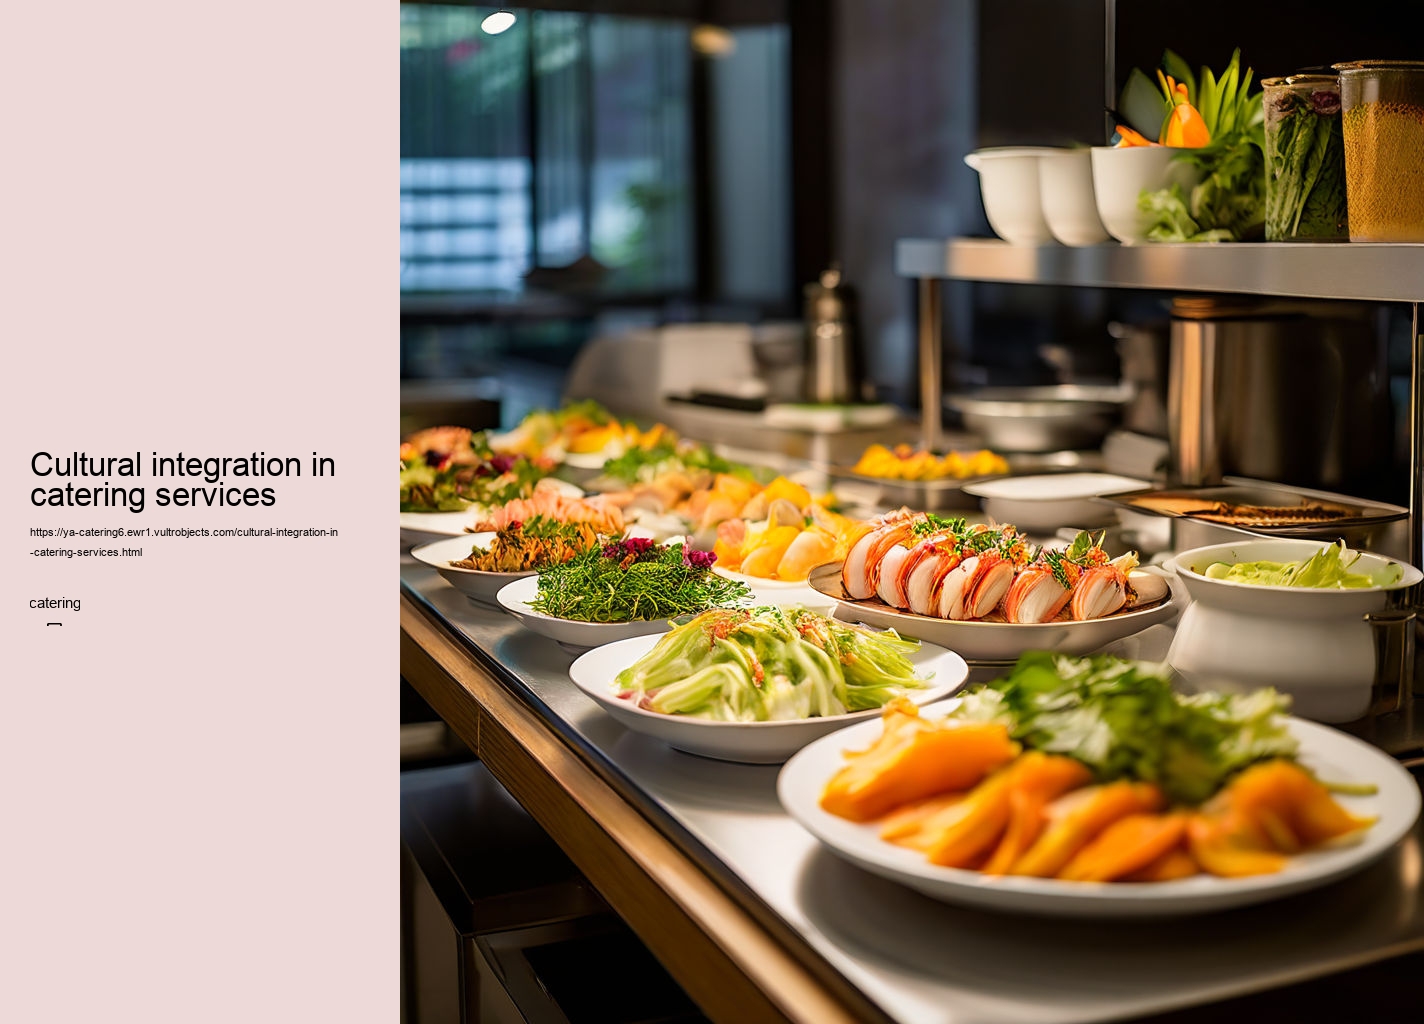 Cultural integration in catering services